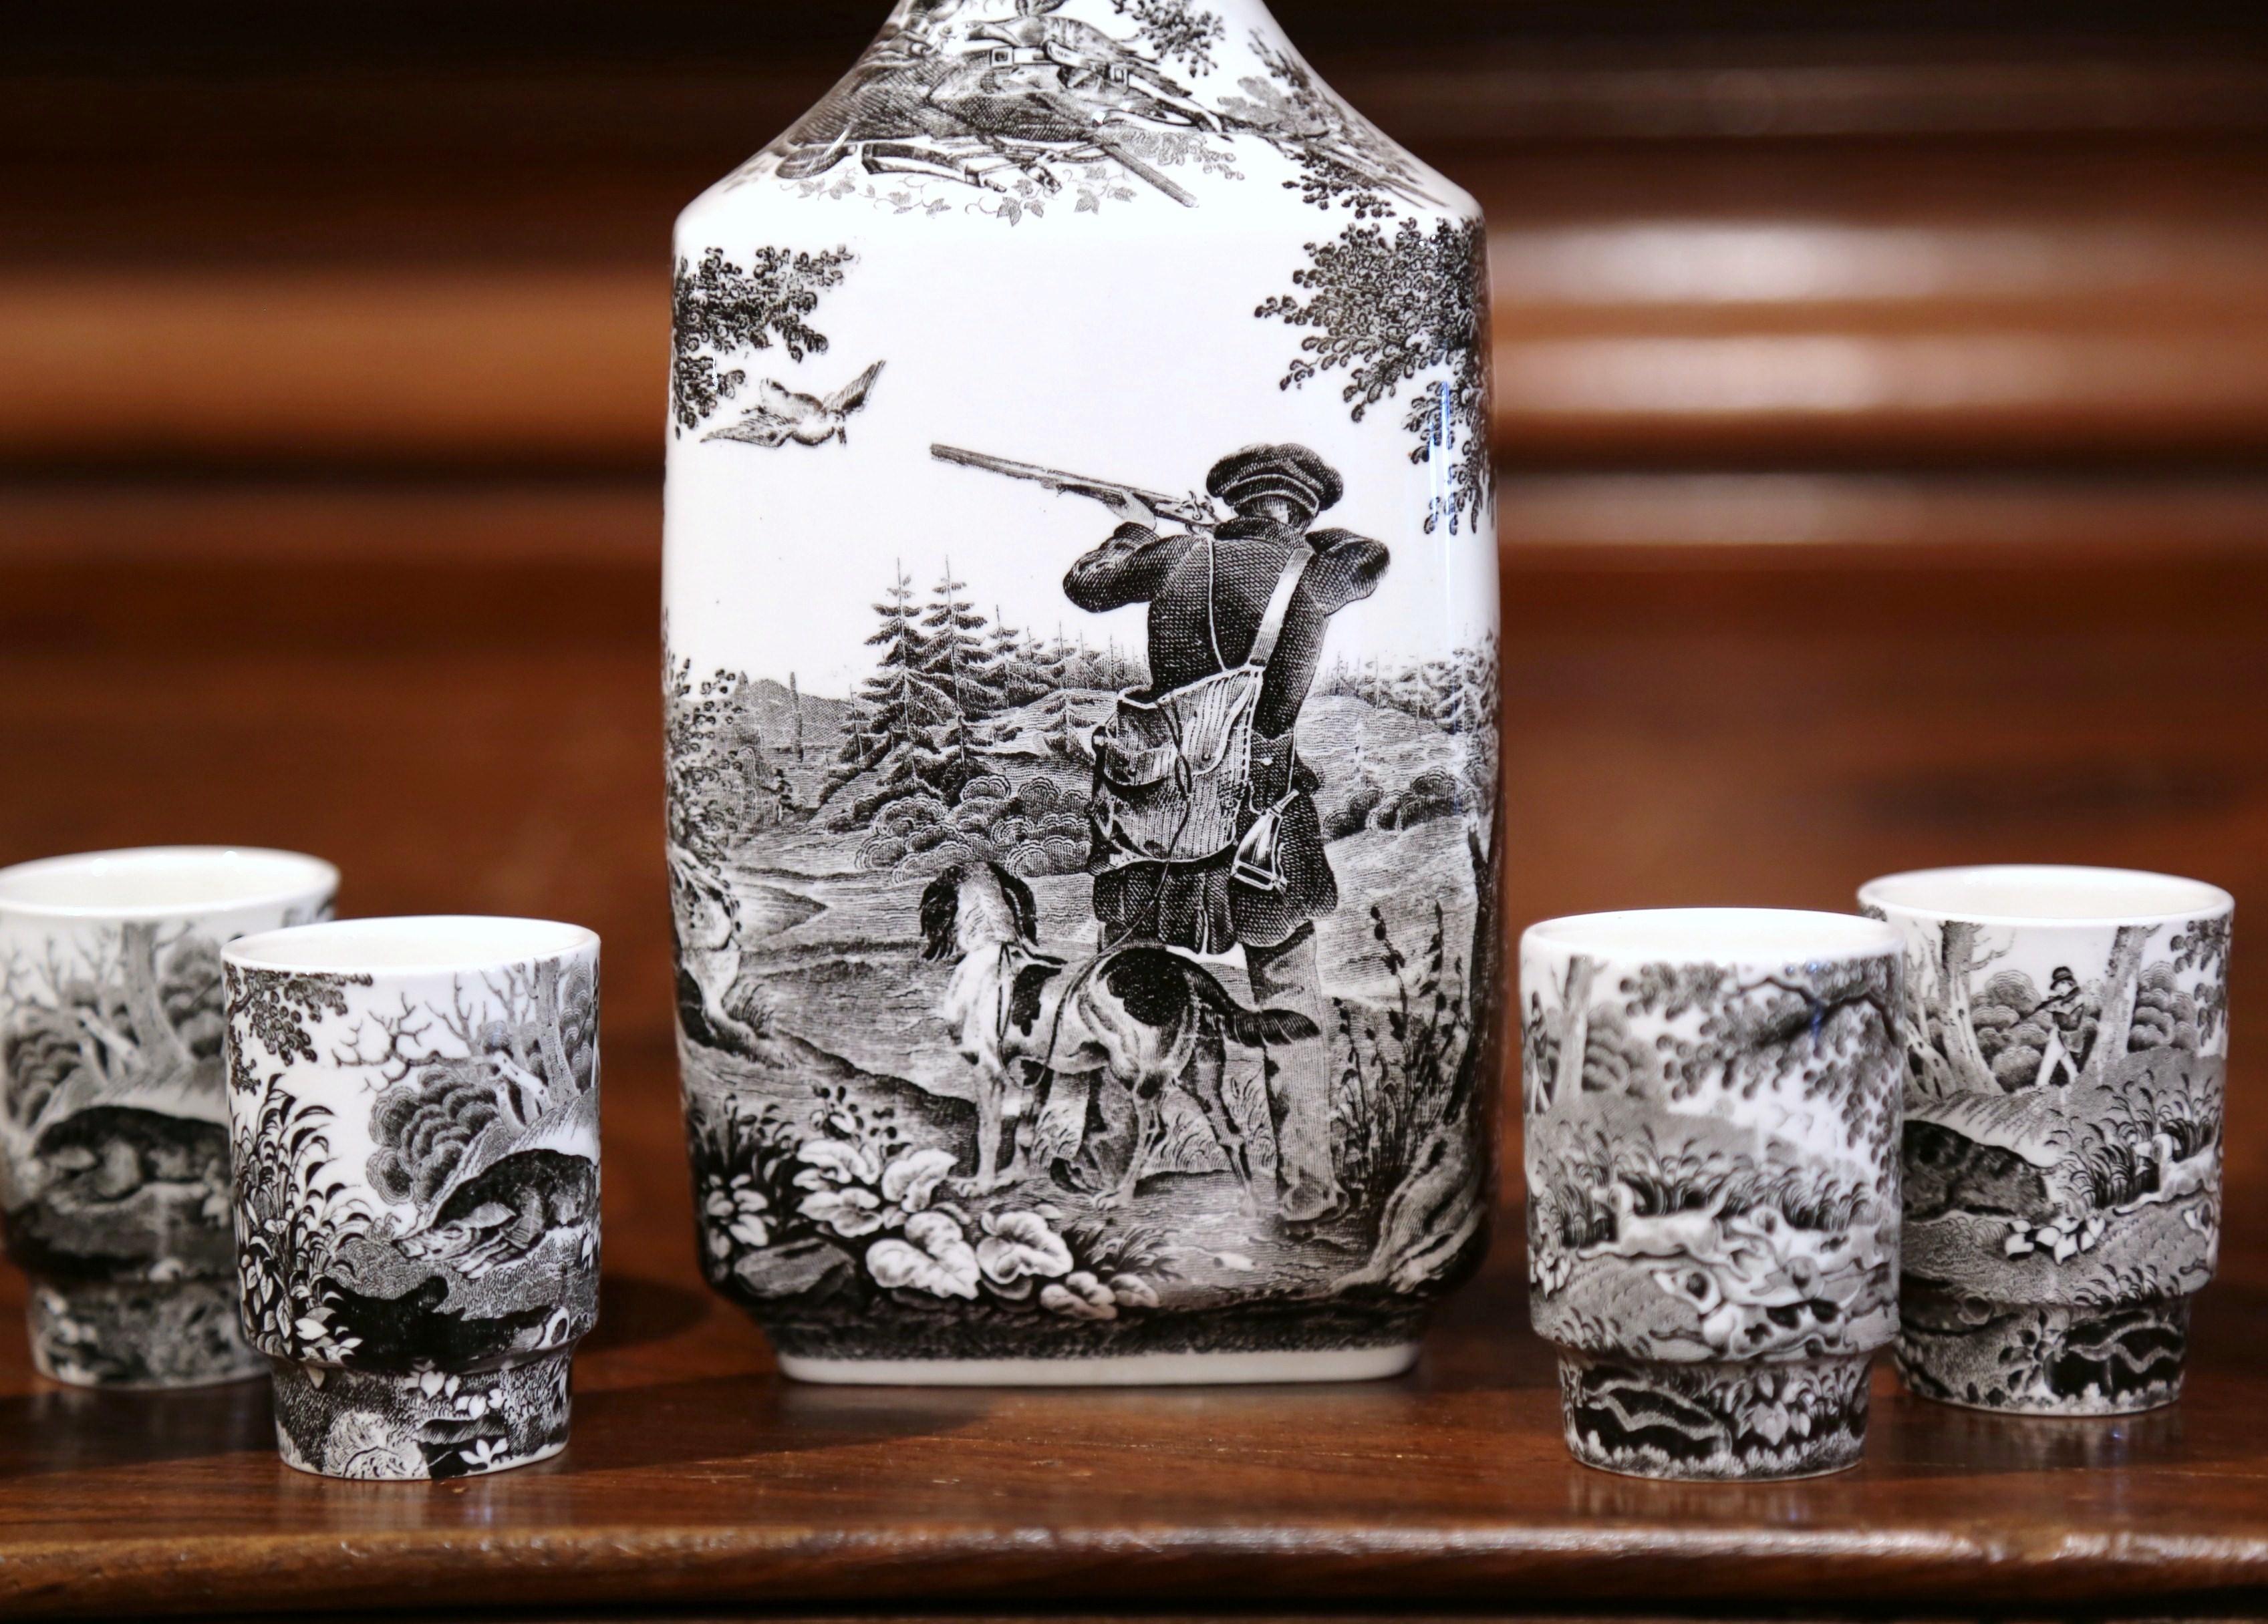 This elegant, porcelain liquor set was crafted in Germany in 1950, and features a hunting scene in a traditional, European style. The hand painted black and white porcelain set comprises a decanter with a stopper and four complementary shot glasses.